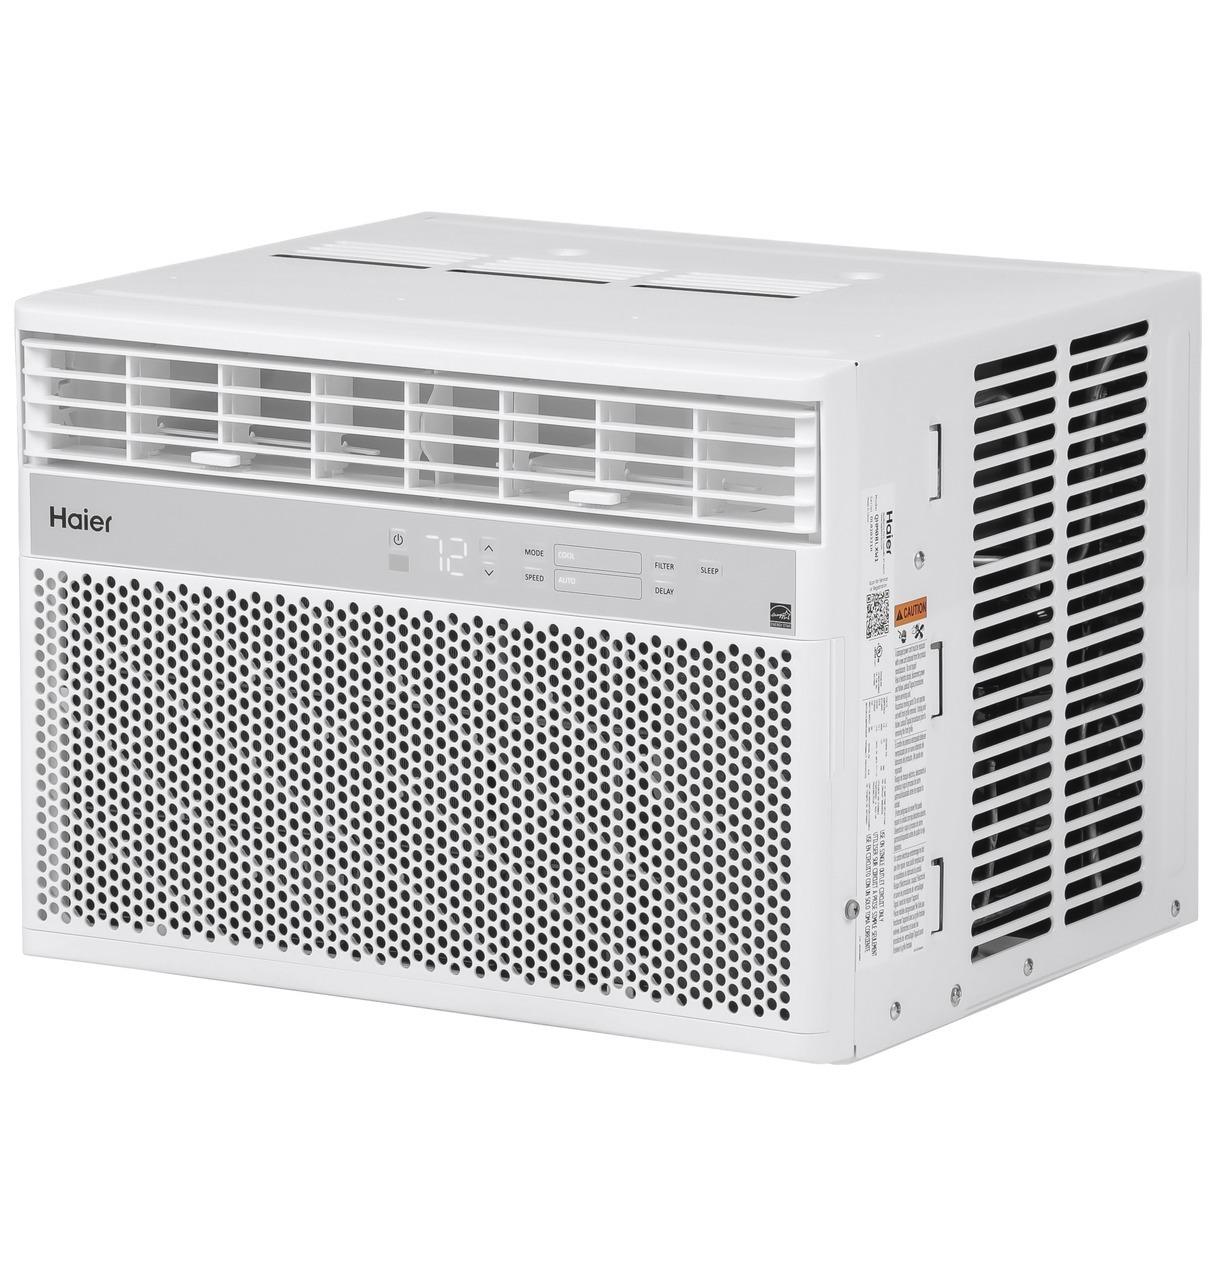 Haier ENERGY STAR® 230 Volt Electronic Room Air Conditioner